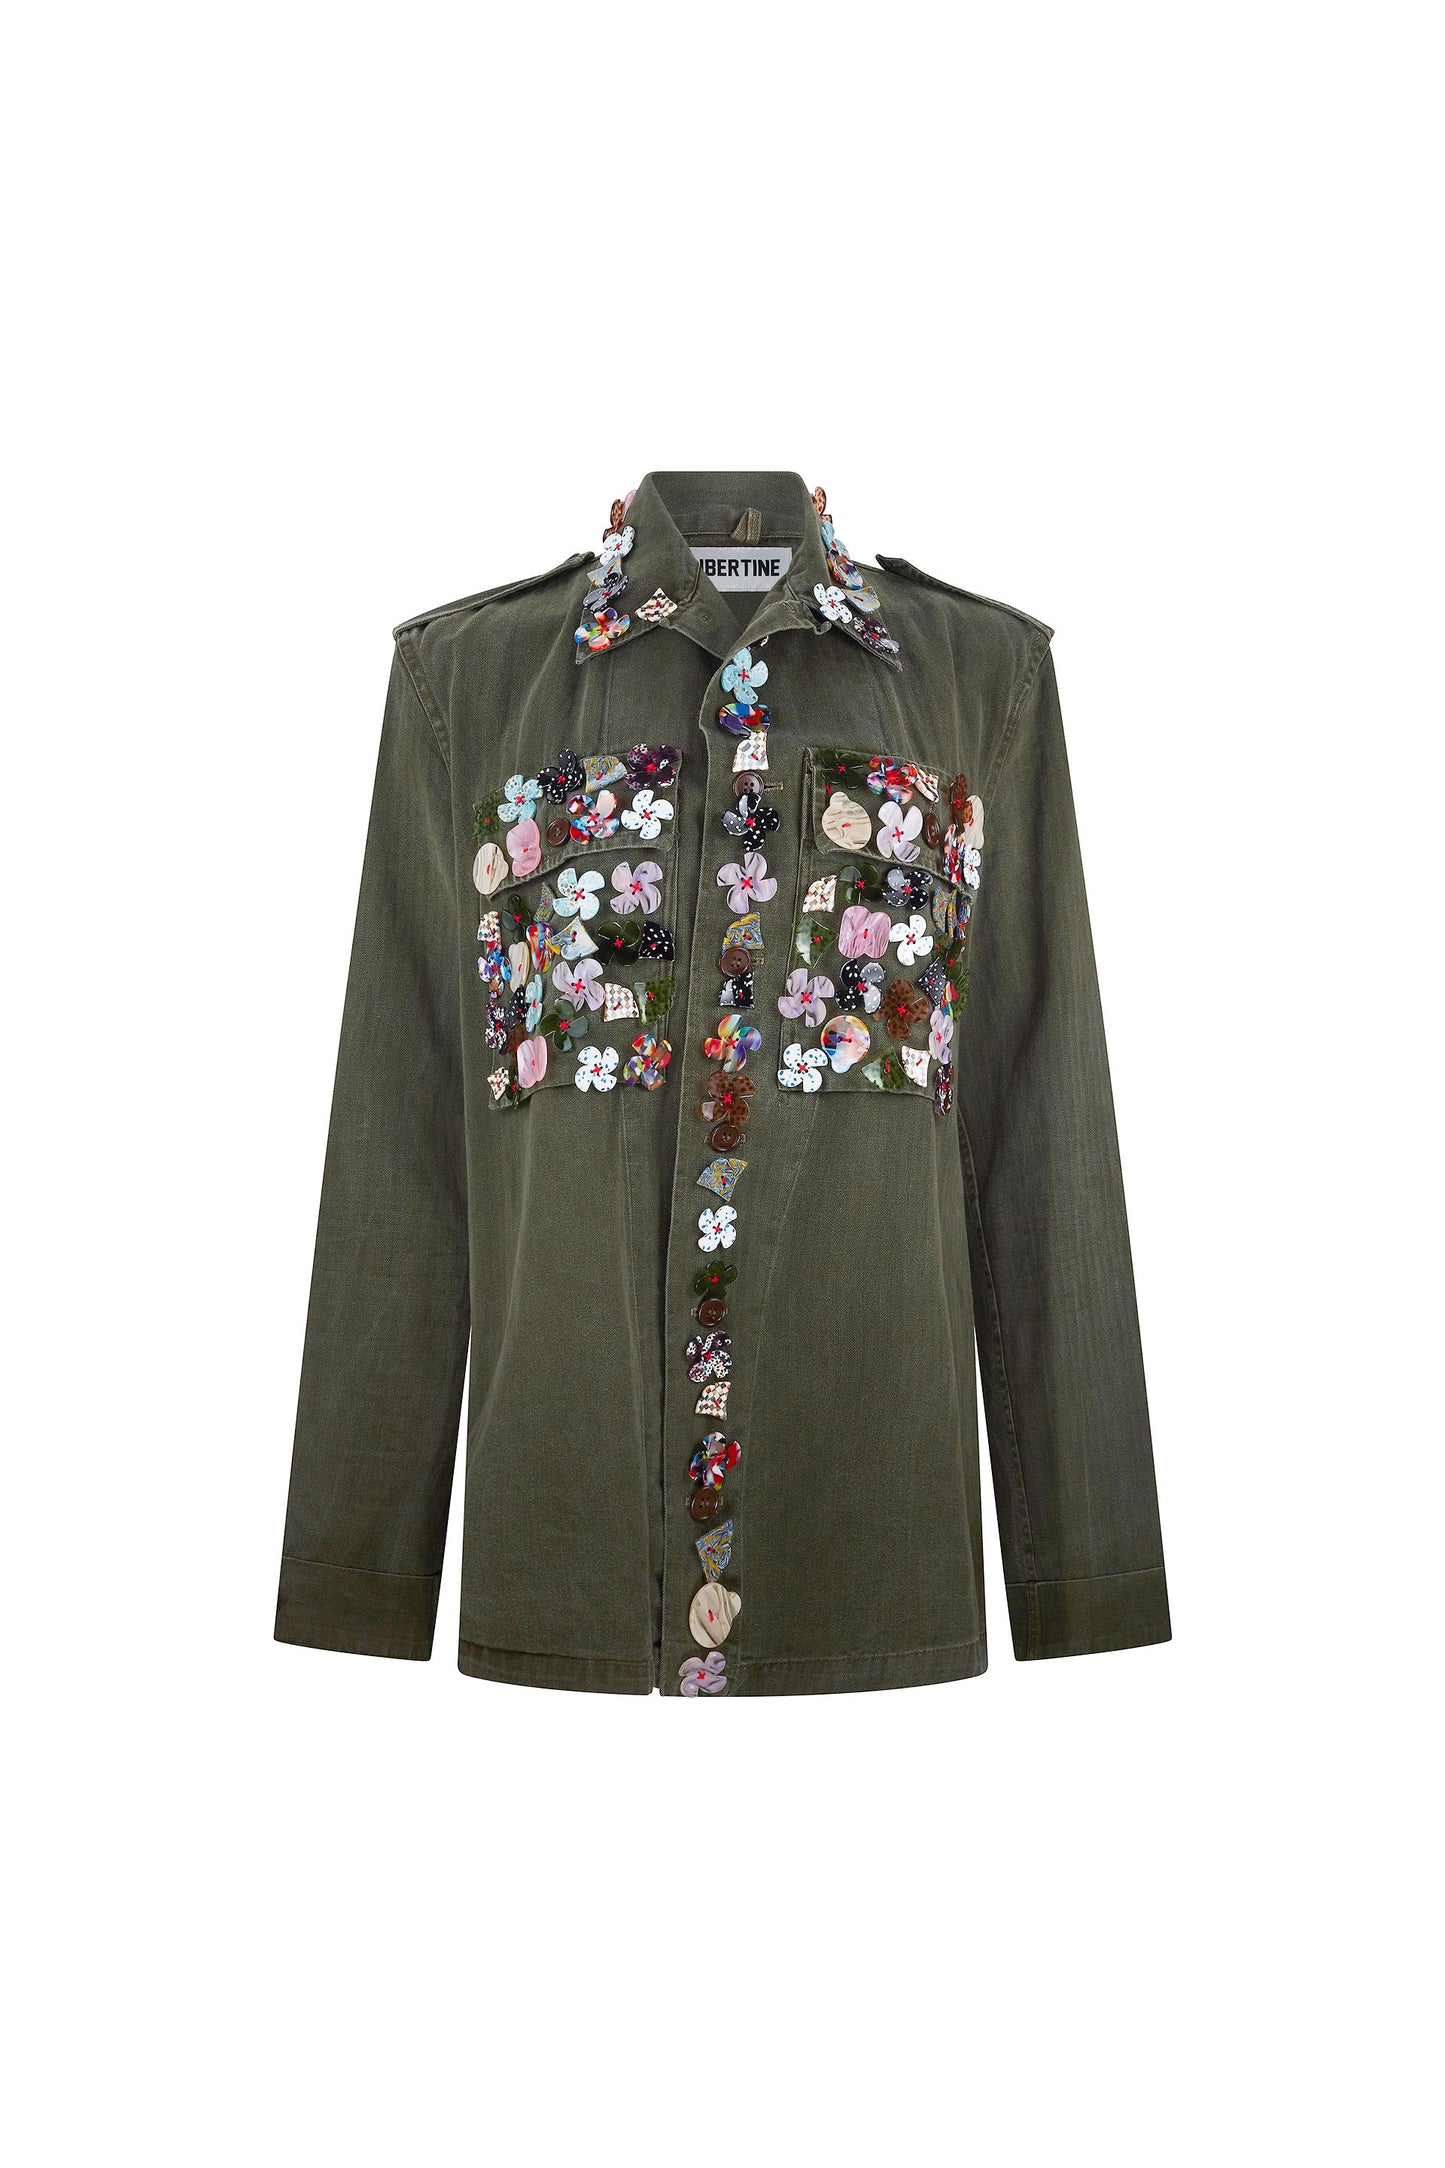 'BUTTON TOWN' VINTAGE FRENCH MILITARY JACKET -  - Libertine